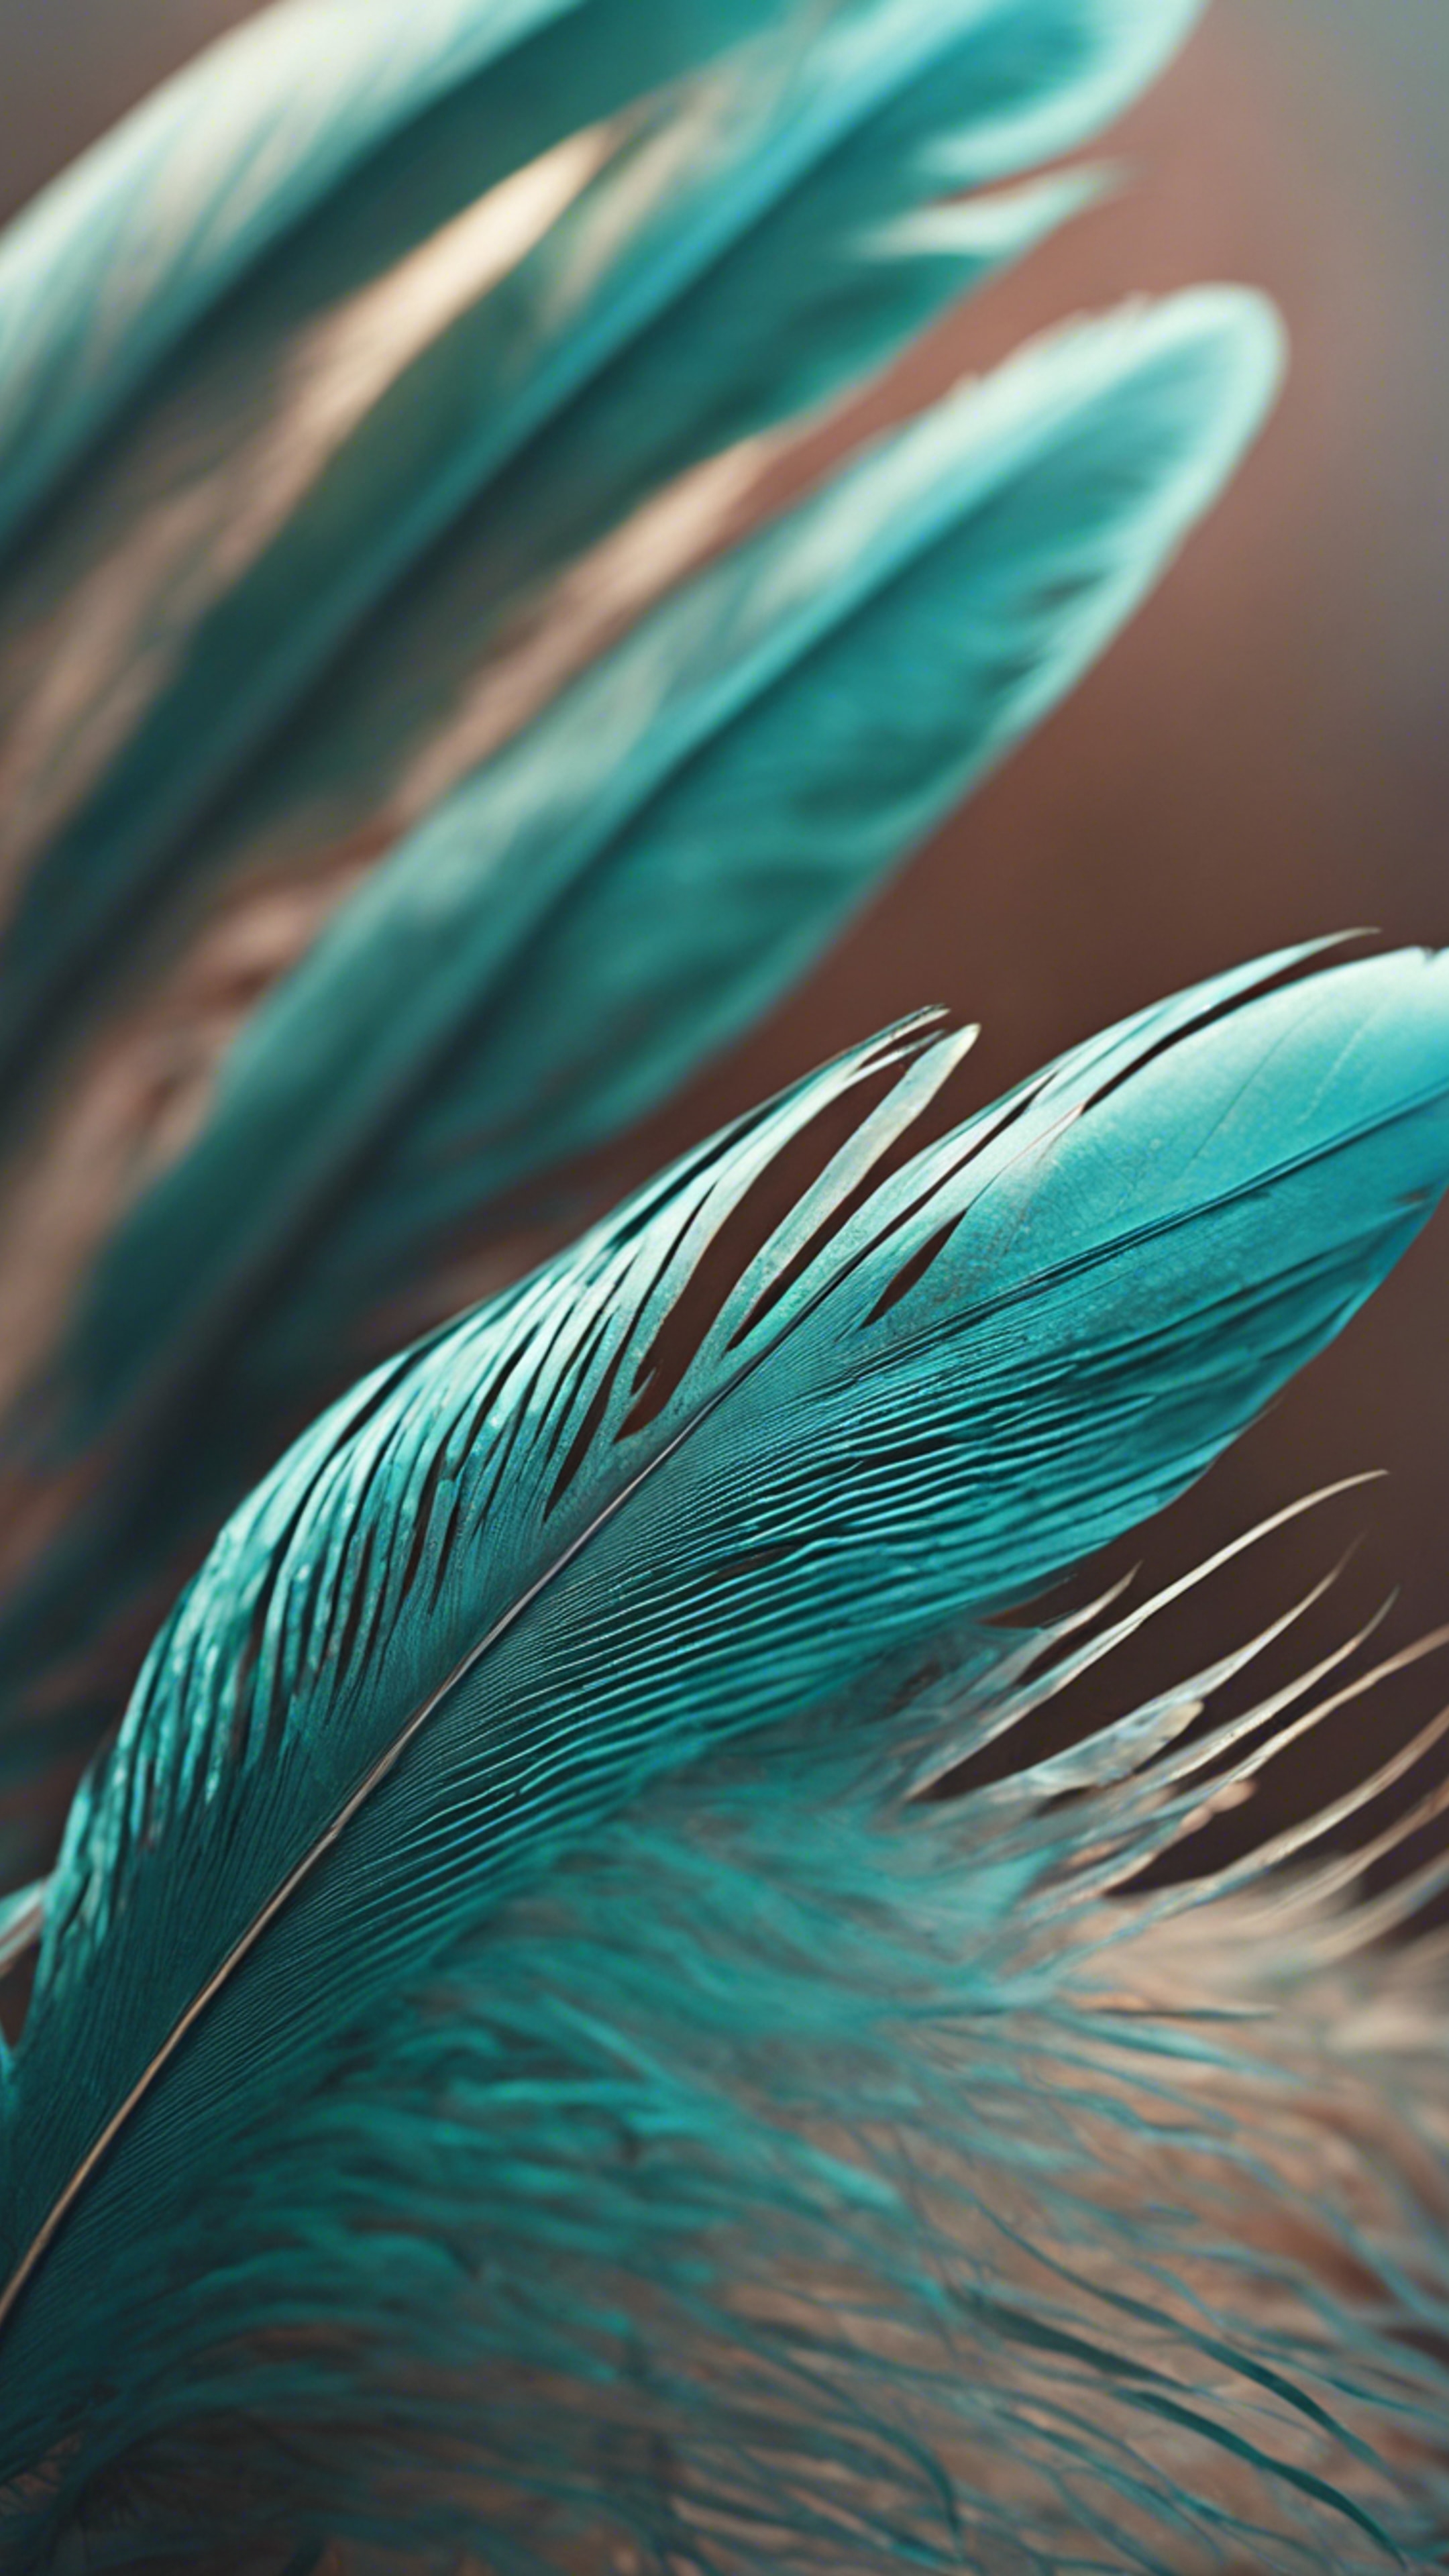 A close-up view of an exotic cool teal-colored birds' feather. 墙纸[44d0beeee9f542d4ae1e]